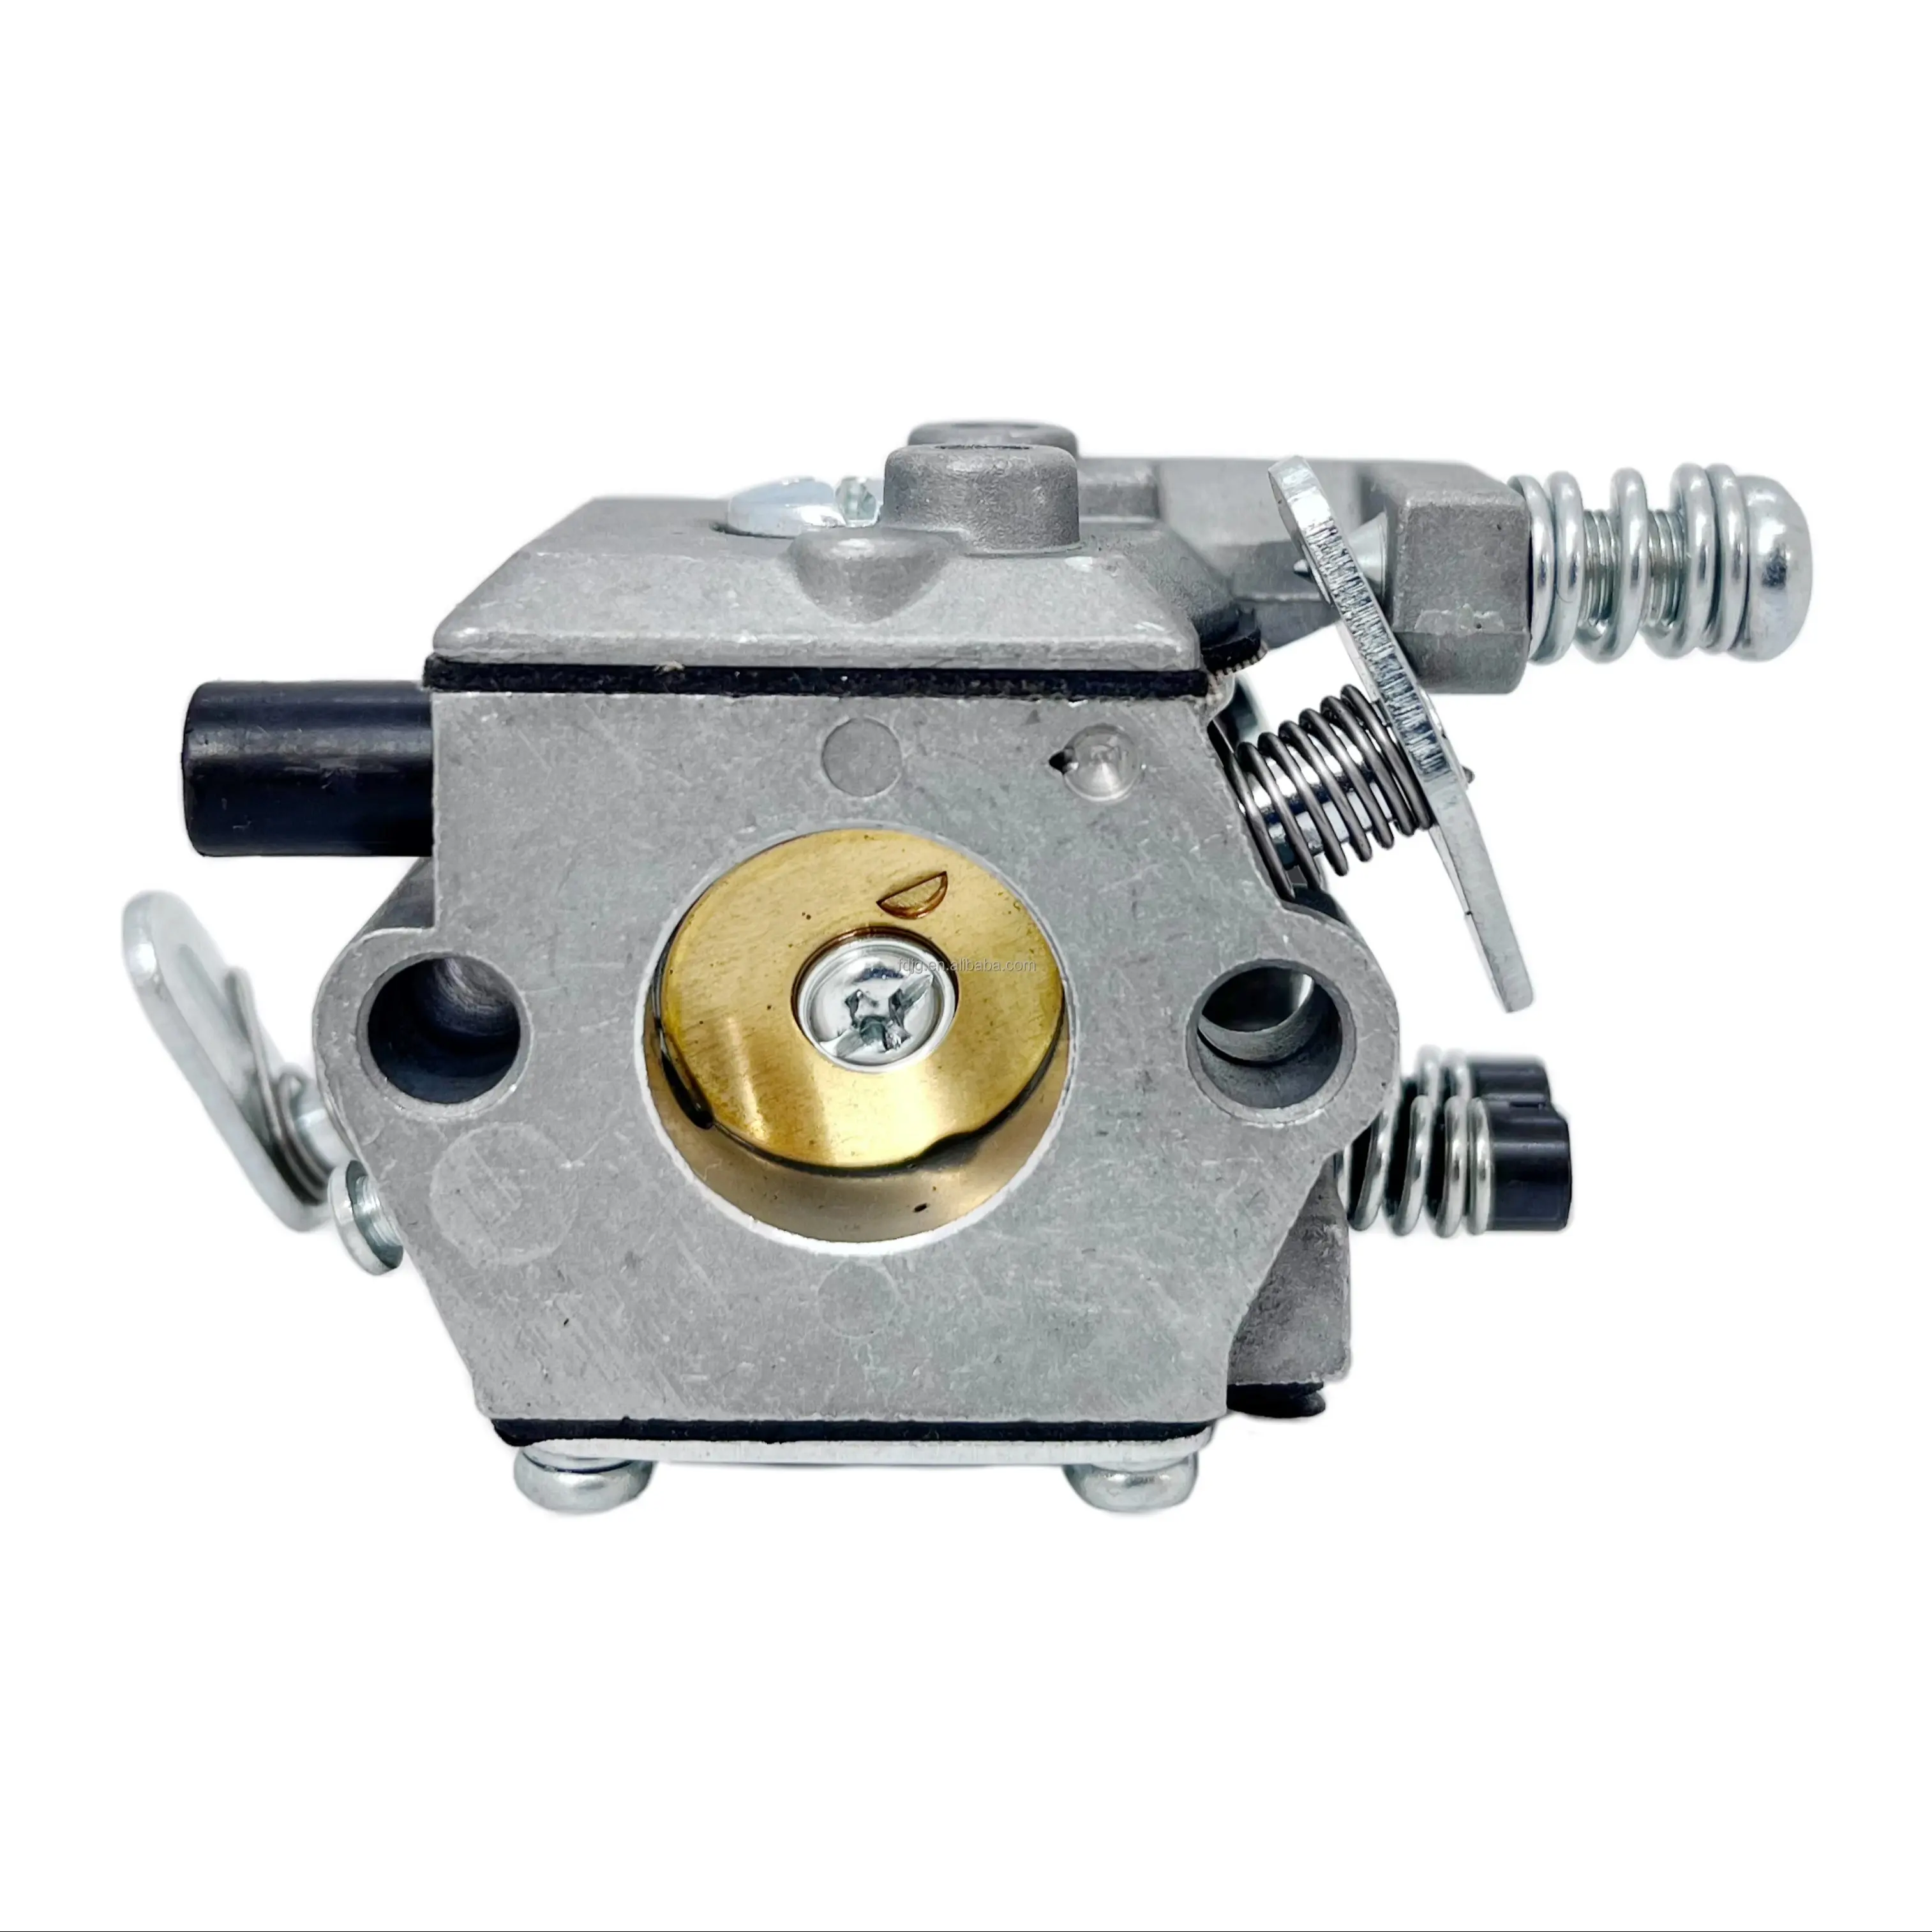 MS250 Carburetor Fits For Stihl 021 023 025 MS210 MS230 MS250 Gasoline Chainsaw Carburetor WT286 Chainsaw Spare Parts